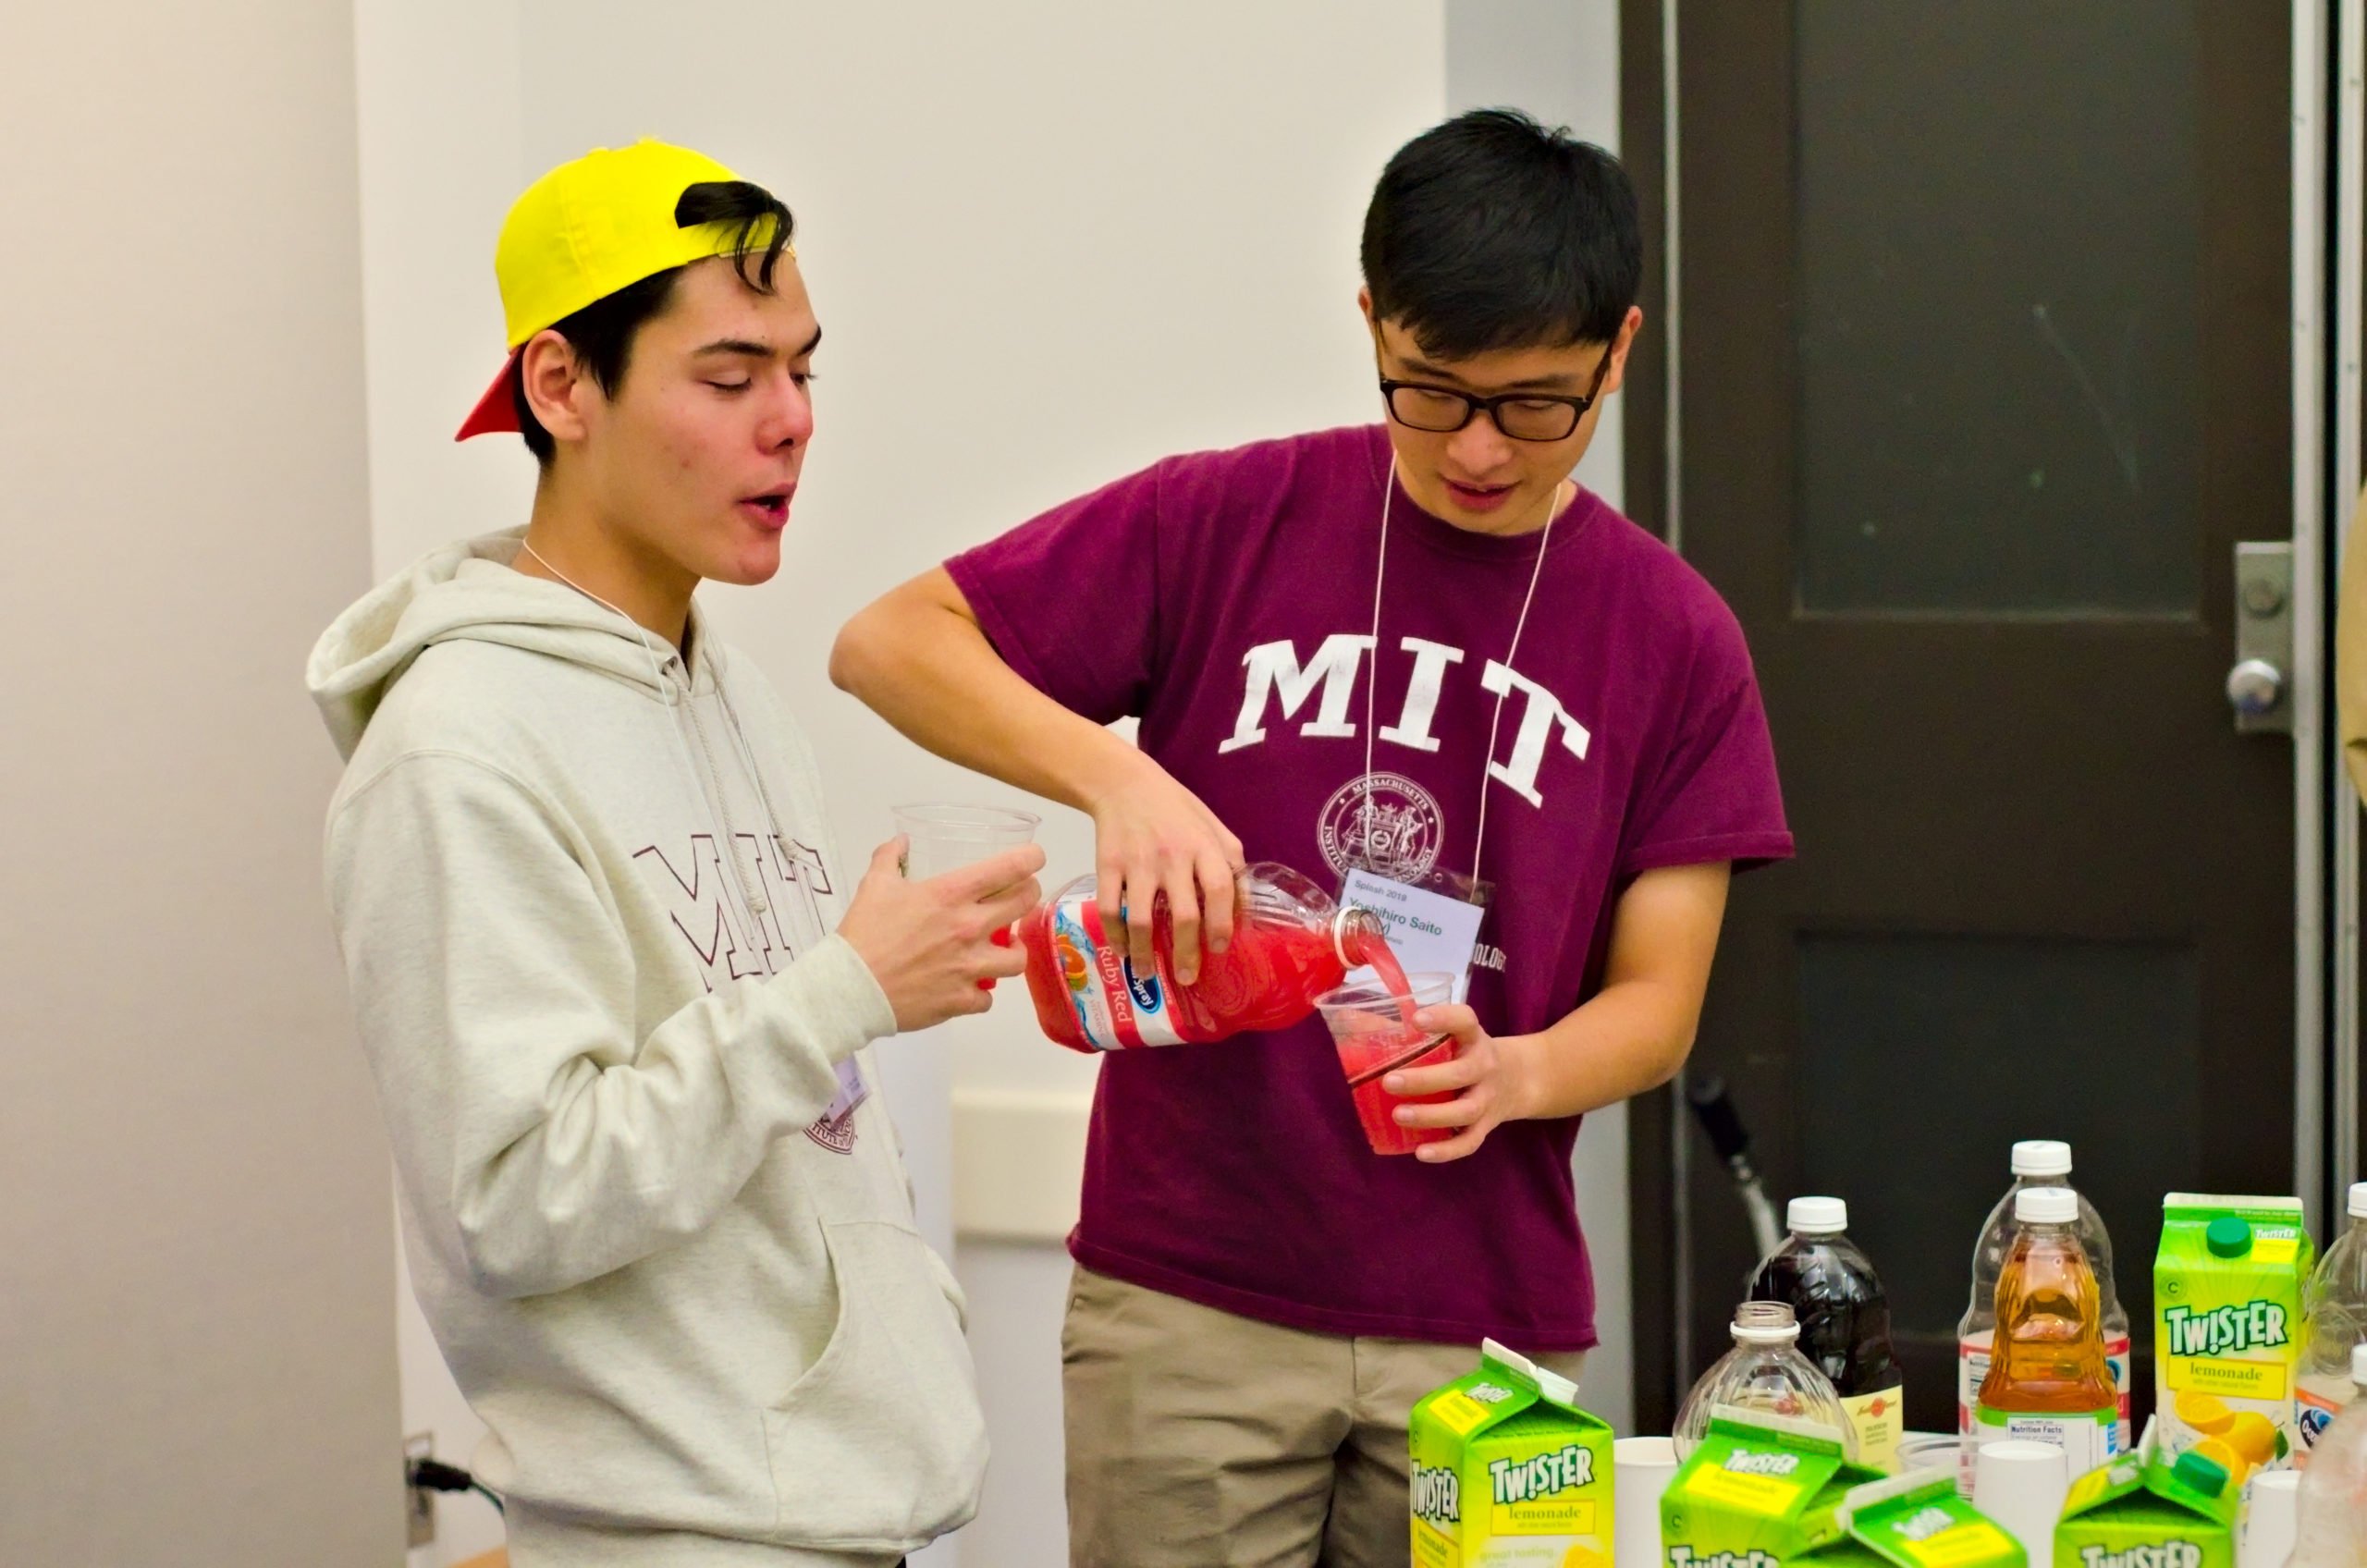 yoshi s. ’22 pours ruby red into a cup; marco n. ’23 stands next to him with a full cup